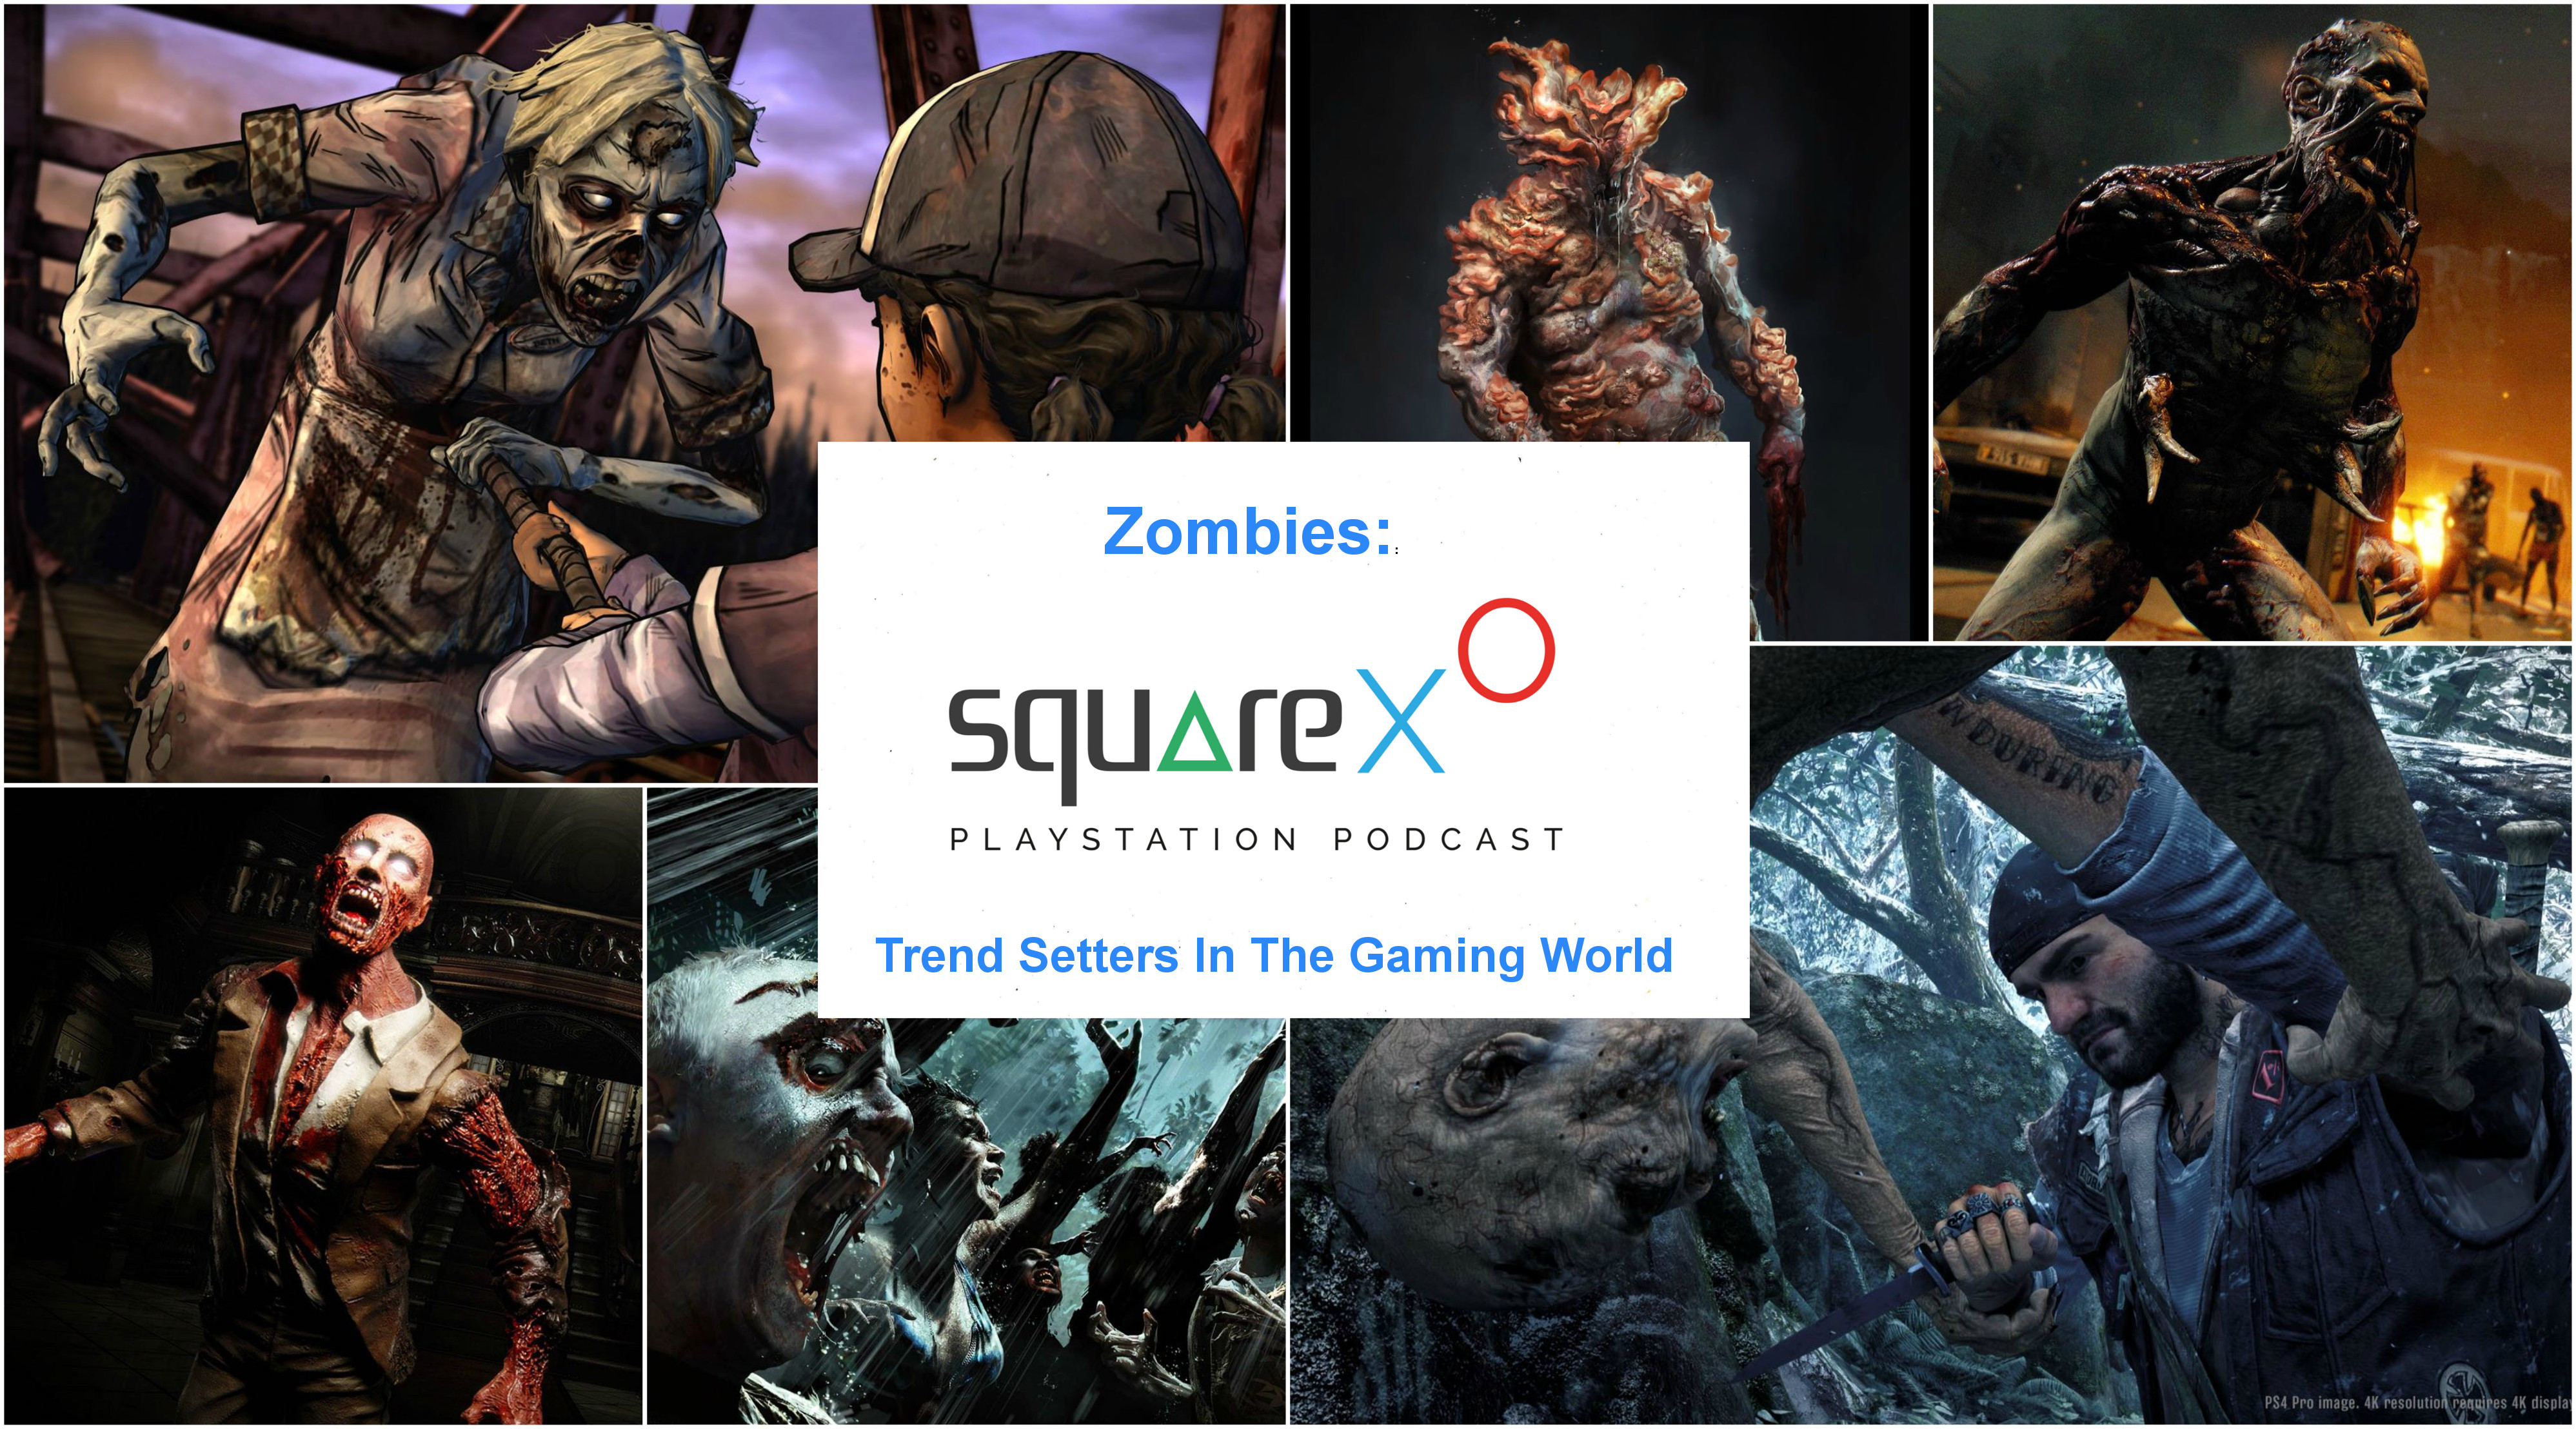 Zombies: Trend Setters in the Gaming World